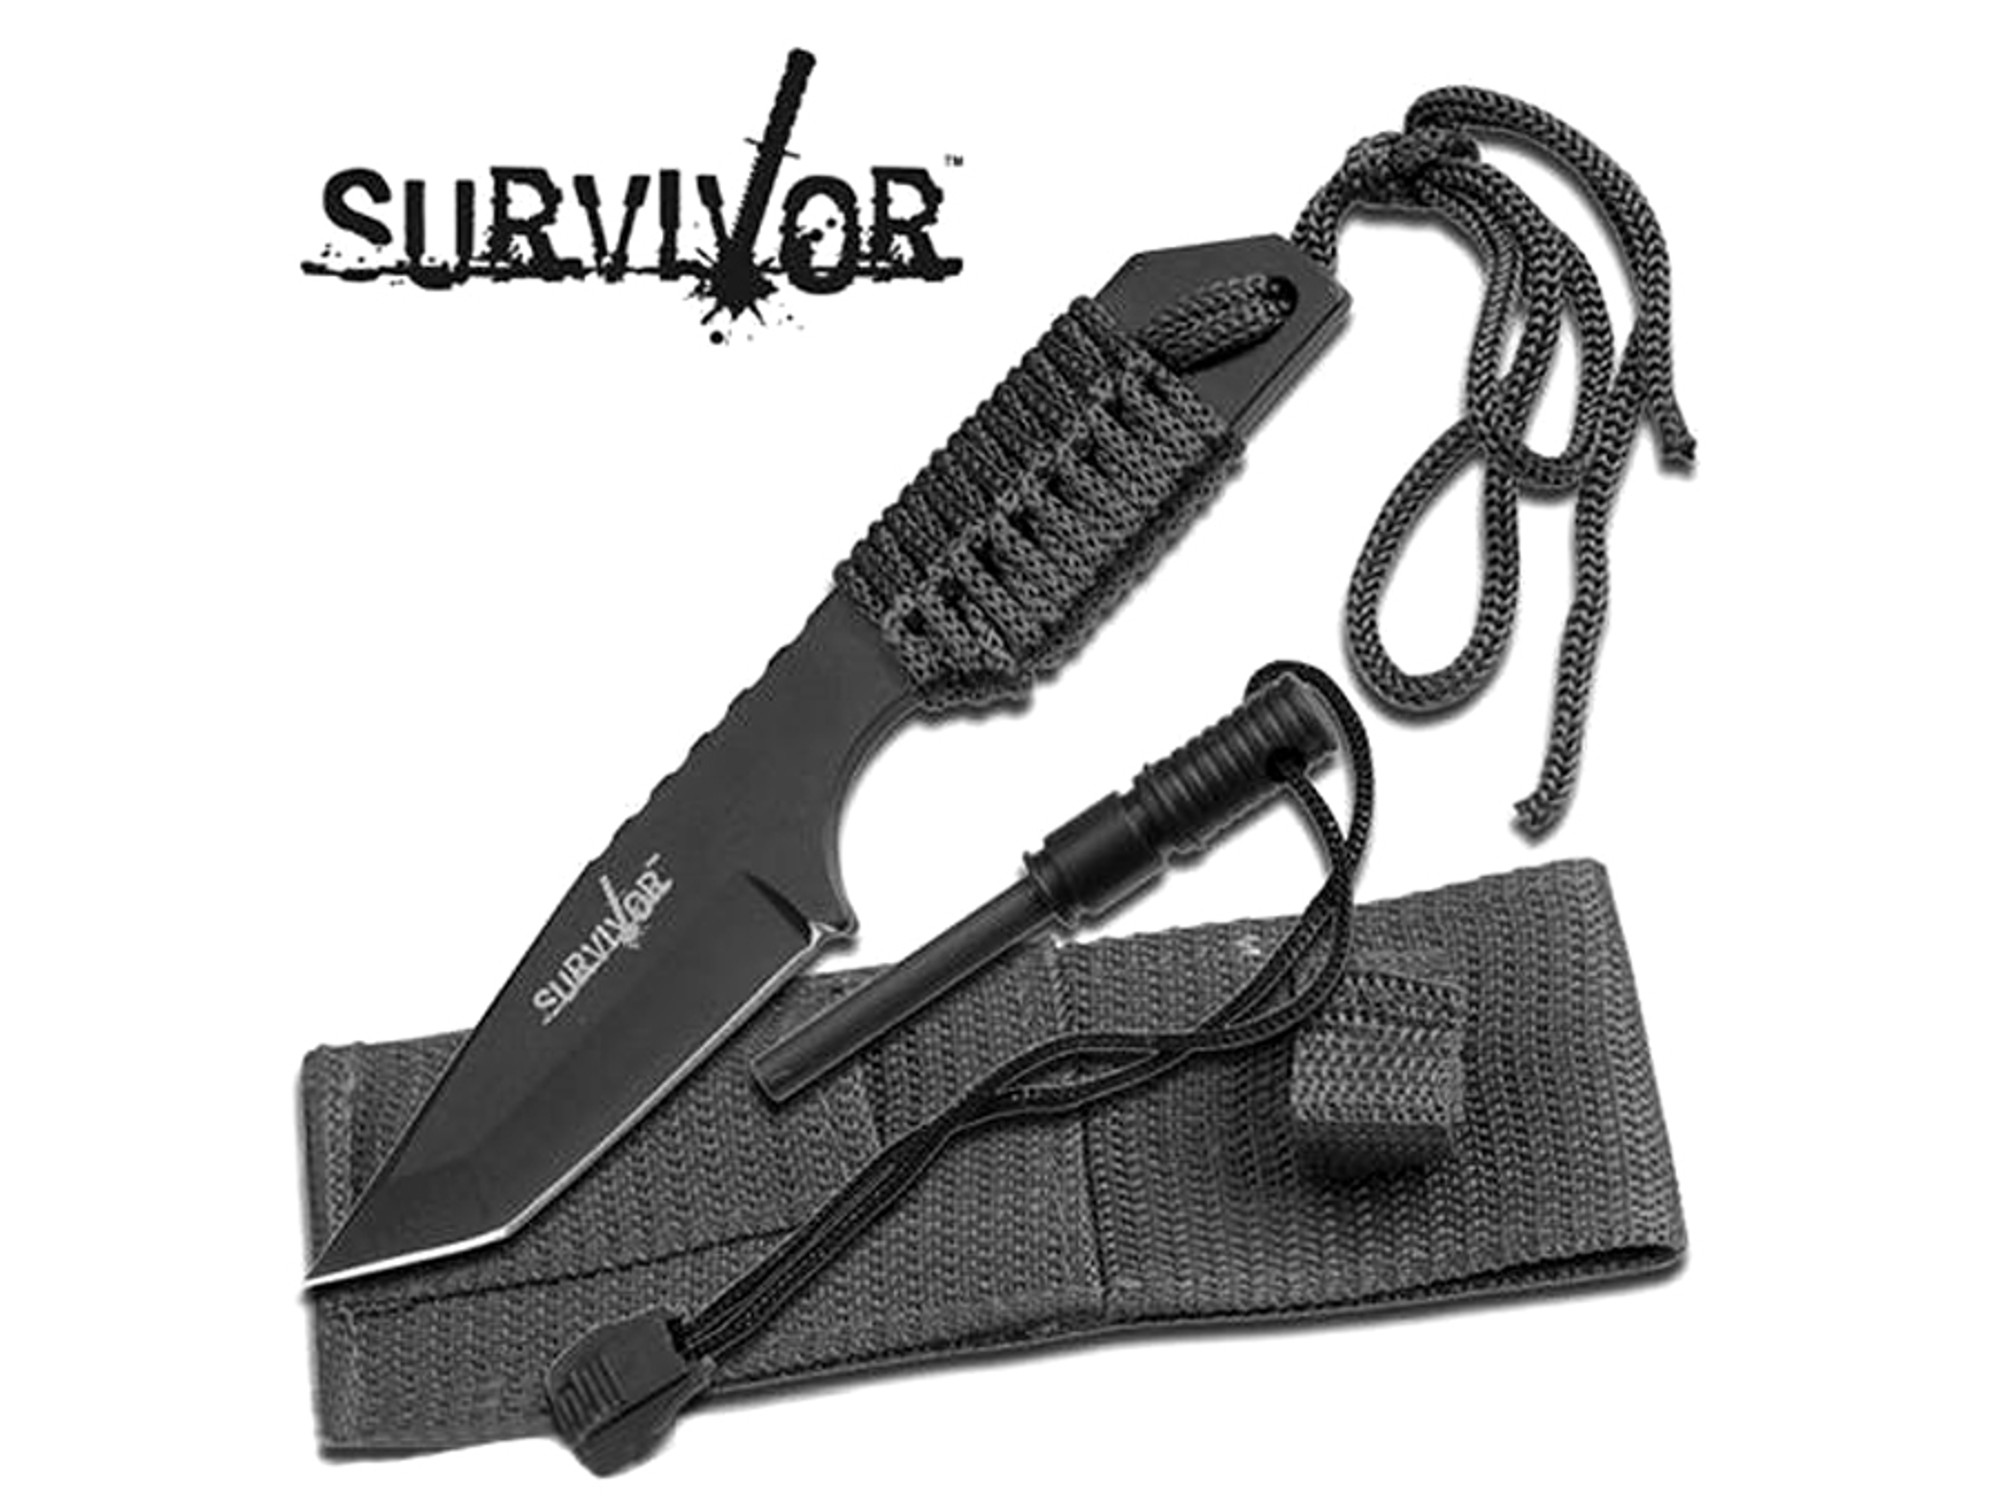 Survivor 7" Cord Wrapped Fixed Blade Survival Knife with Sheath and Fire Starter